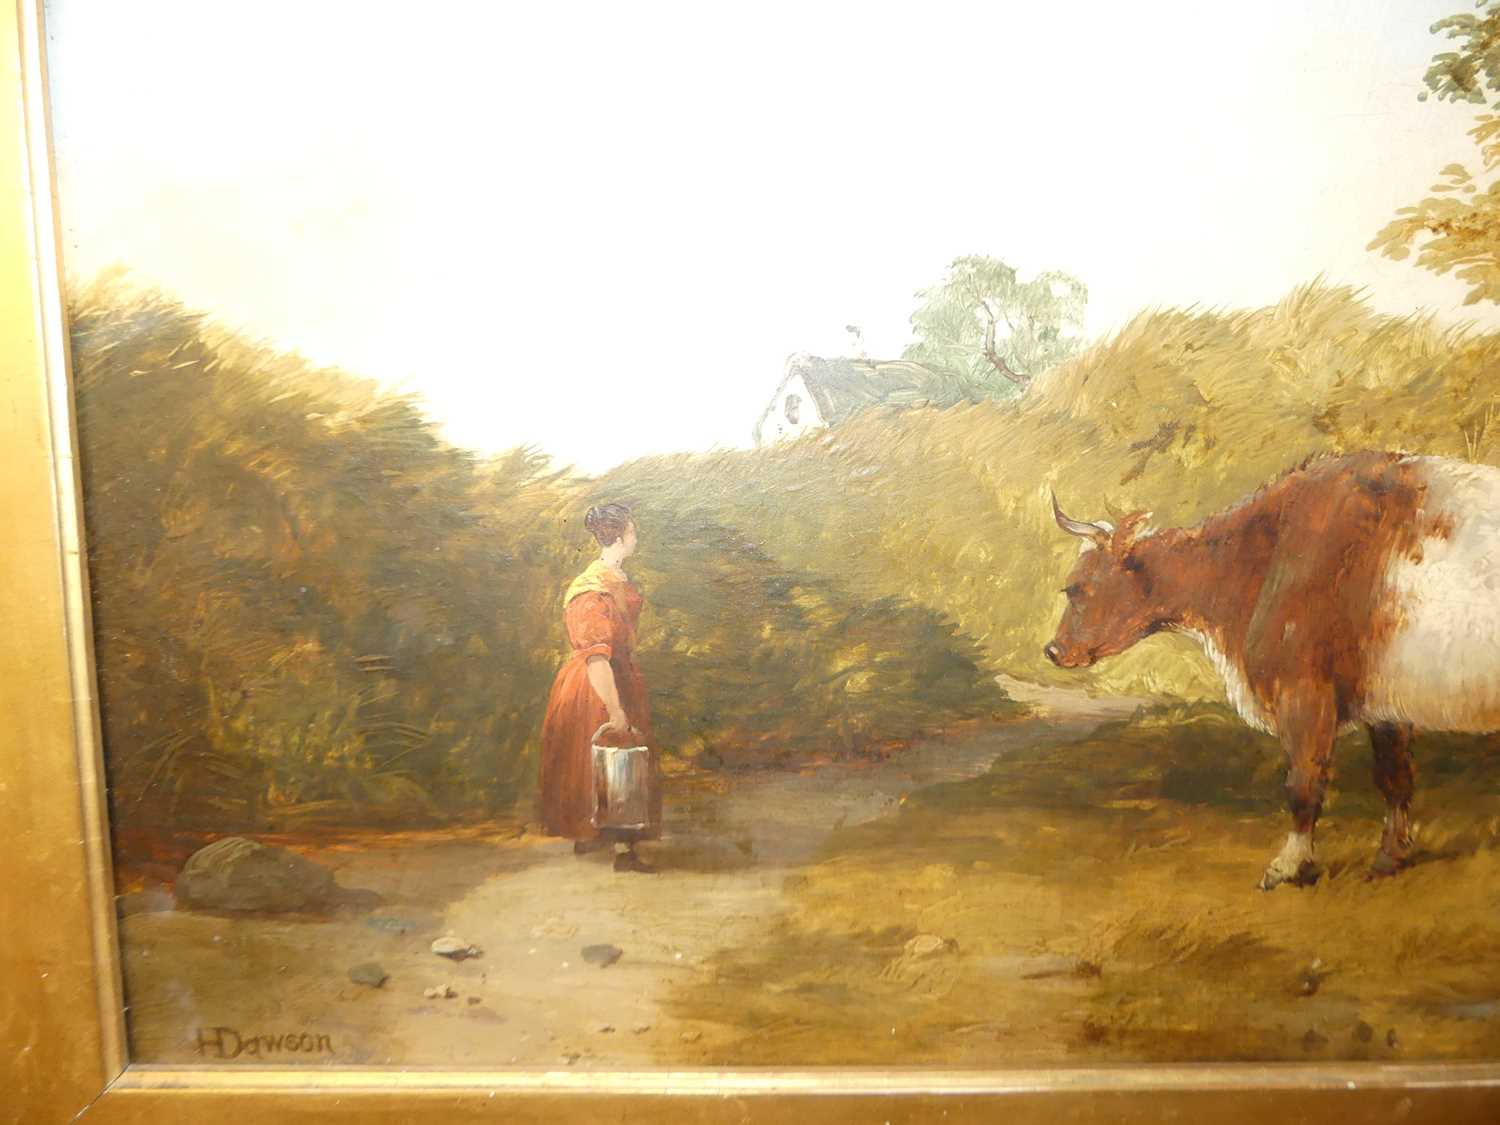 H Dawson - Milking time, oil on canvas, signed lower left, 32 x 59cm - Image 3 of 5